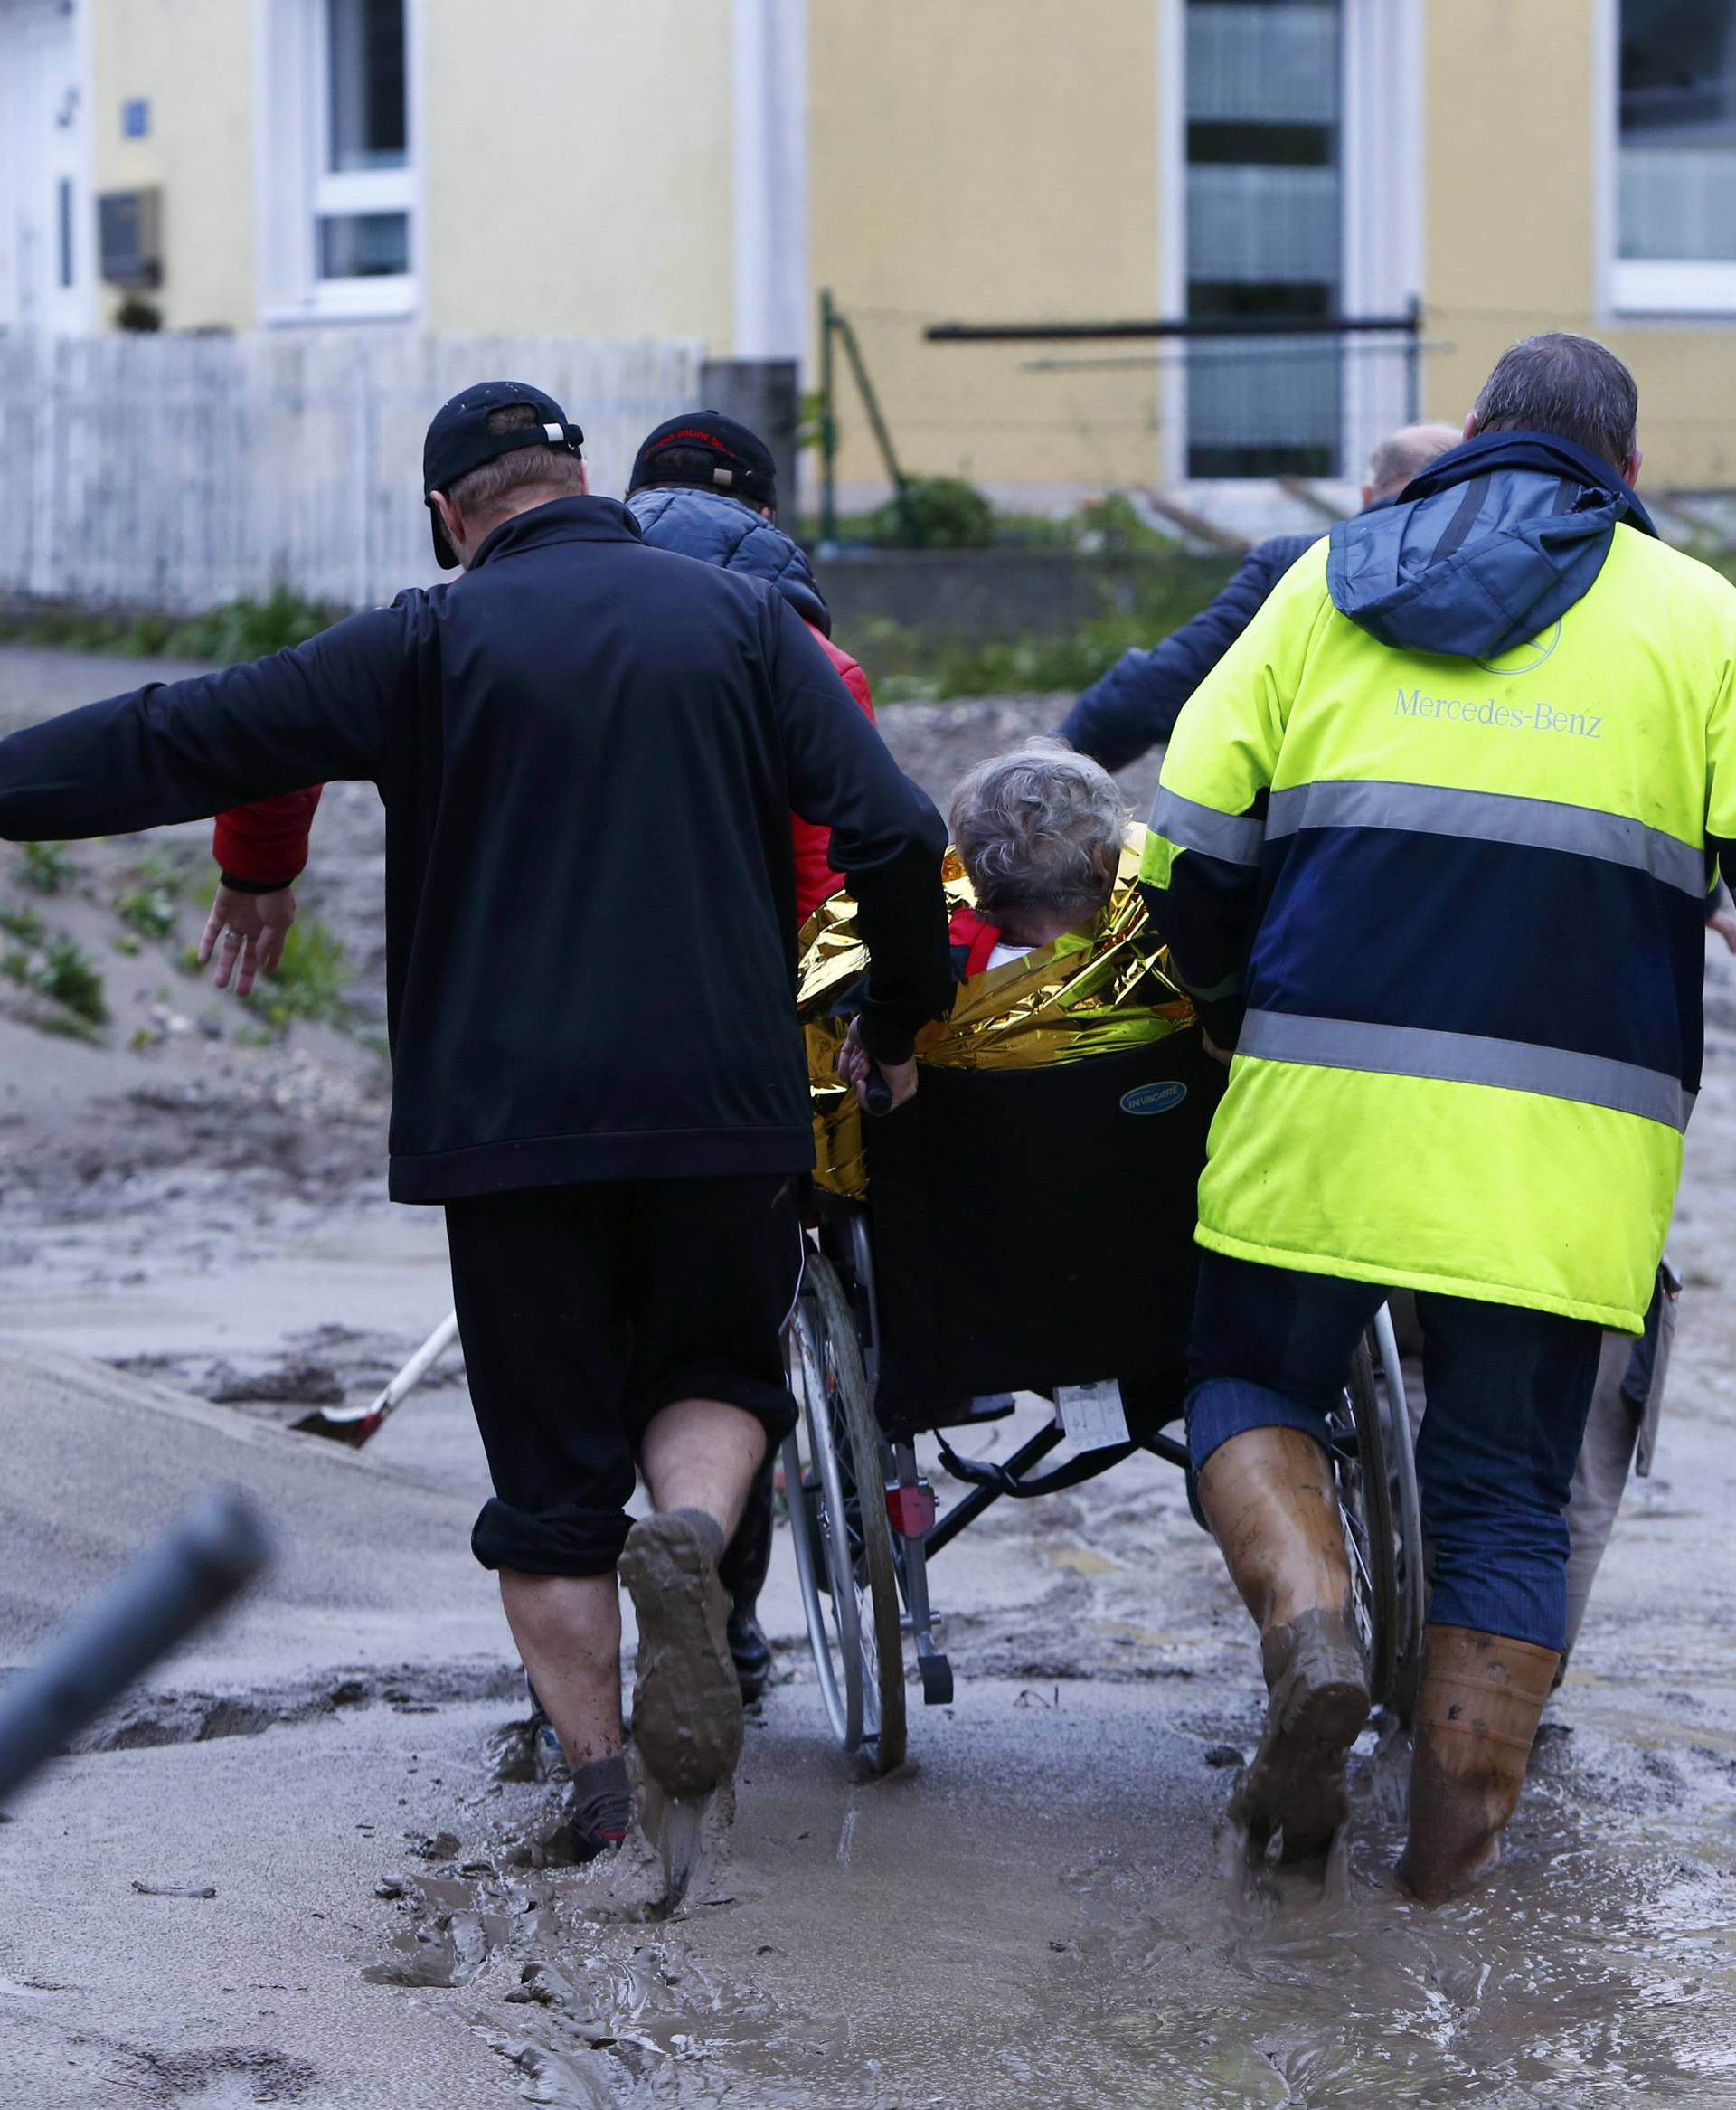 People carry an elderly woman on a wheelchair over mud covered street after floods in the Bavarian village of Simbach am Inn